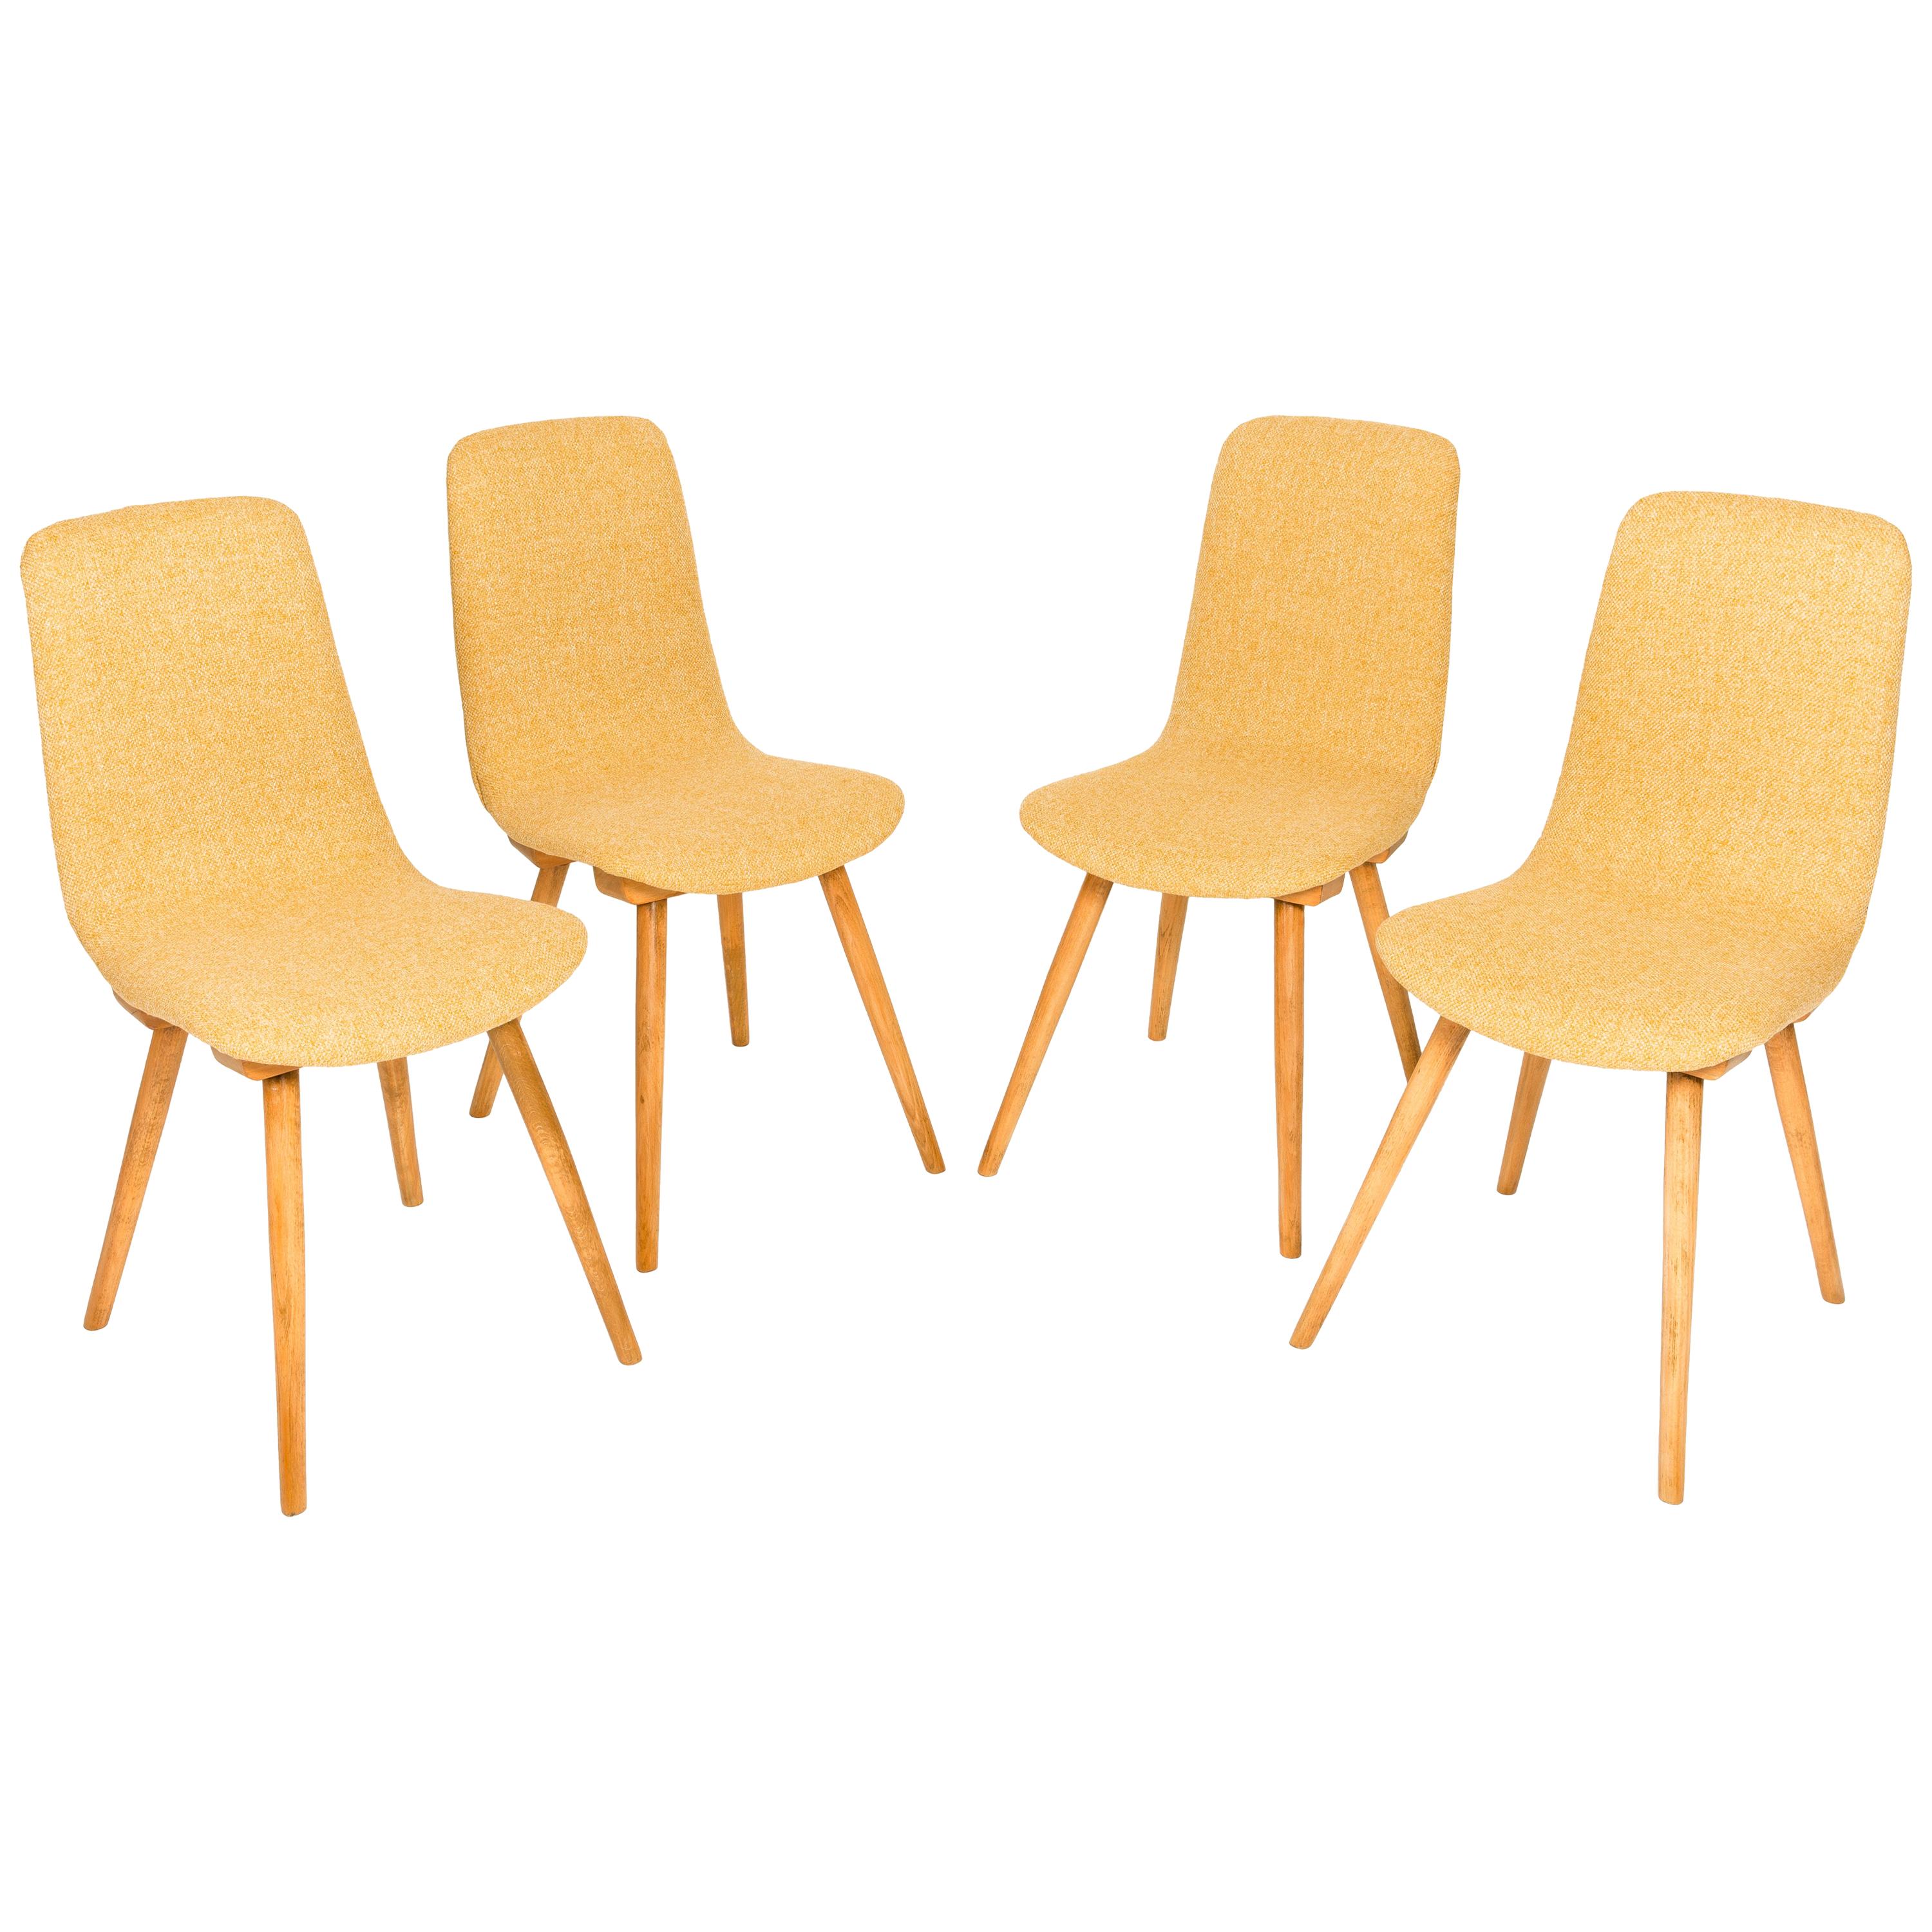 Set of Four 20th Century Fameg Yellow Vintage Chairs, 1960s, Poland For  Sale at 1stDibs